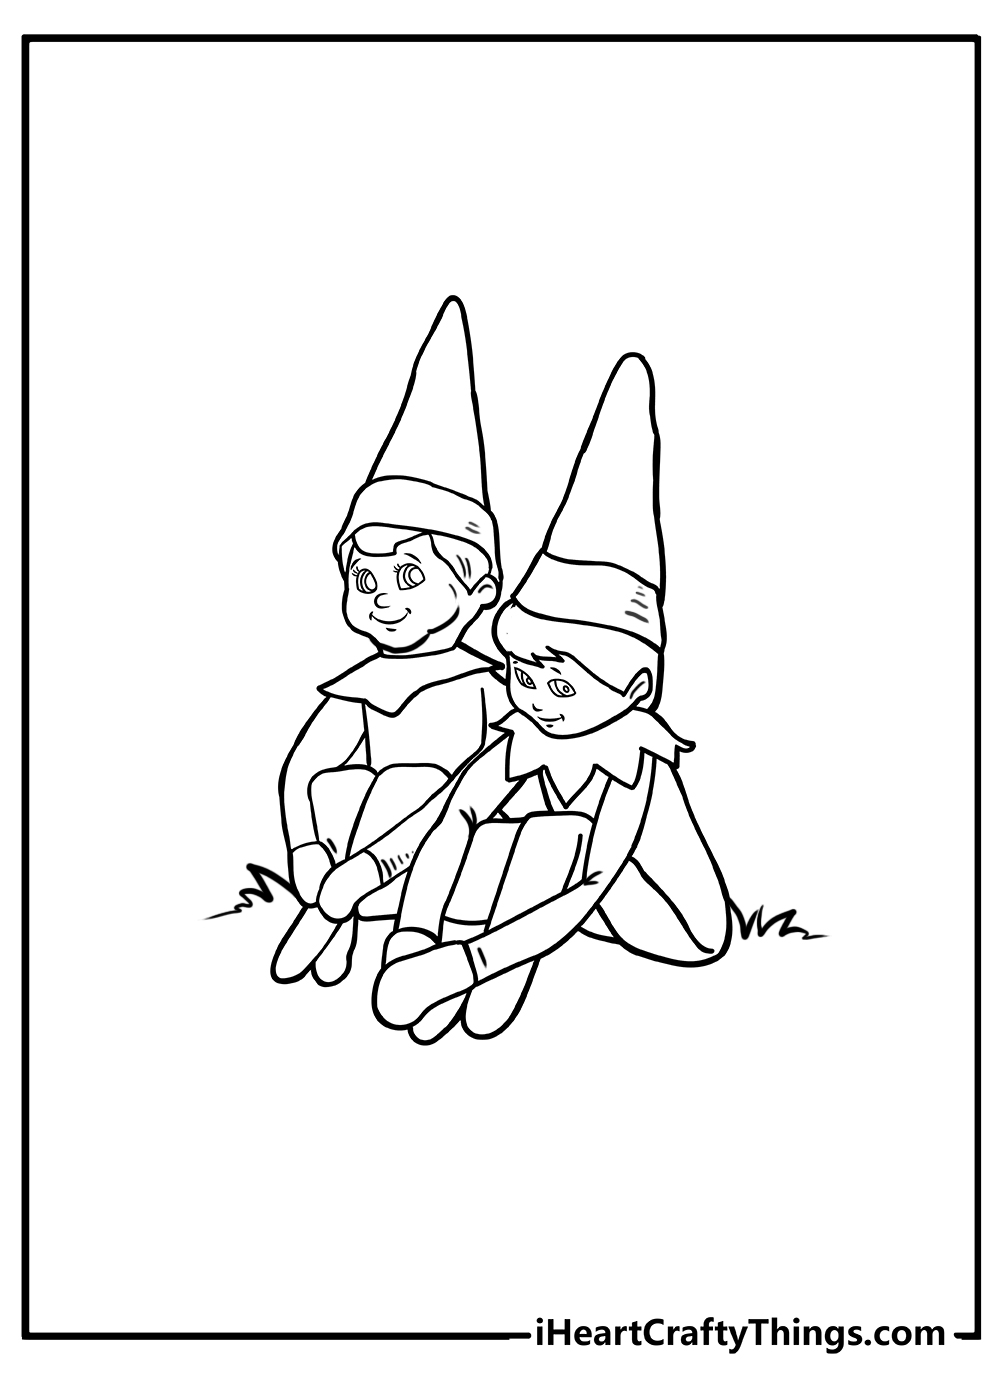 Printable Elf On The Shelf Coloring Pages (Updated 2021)